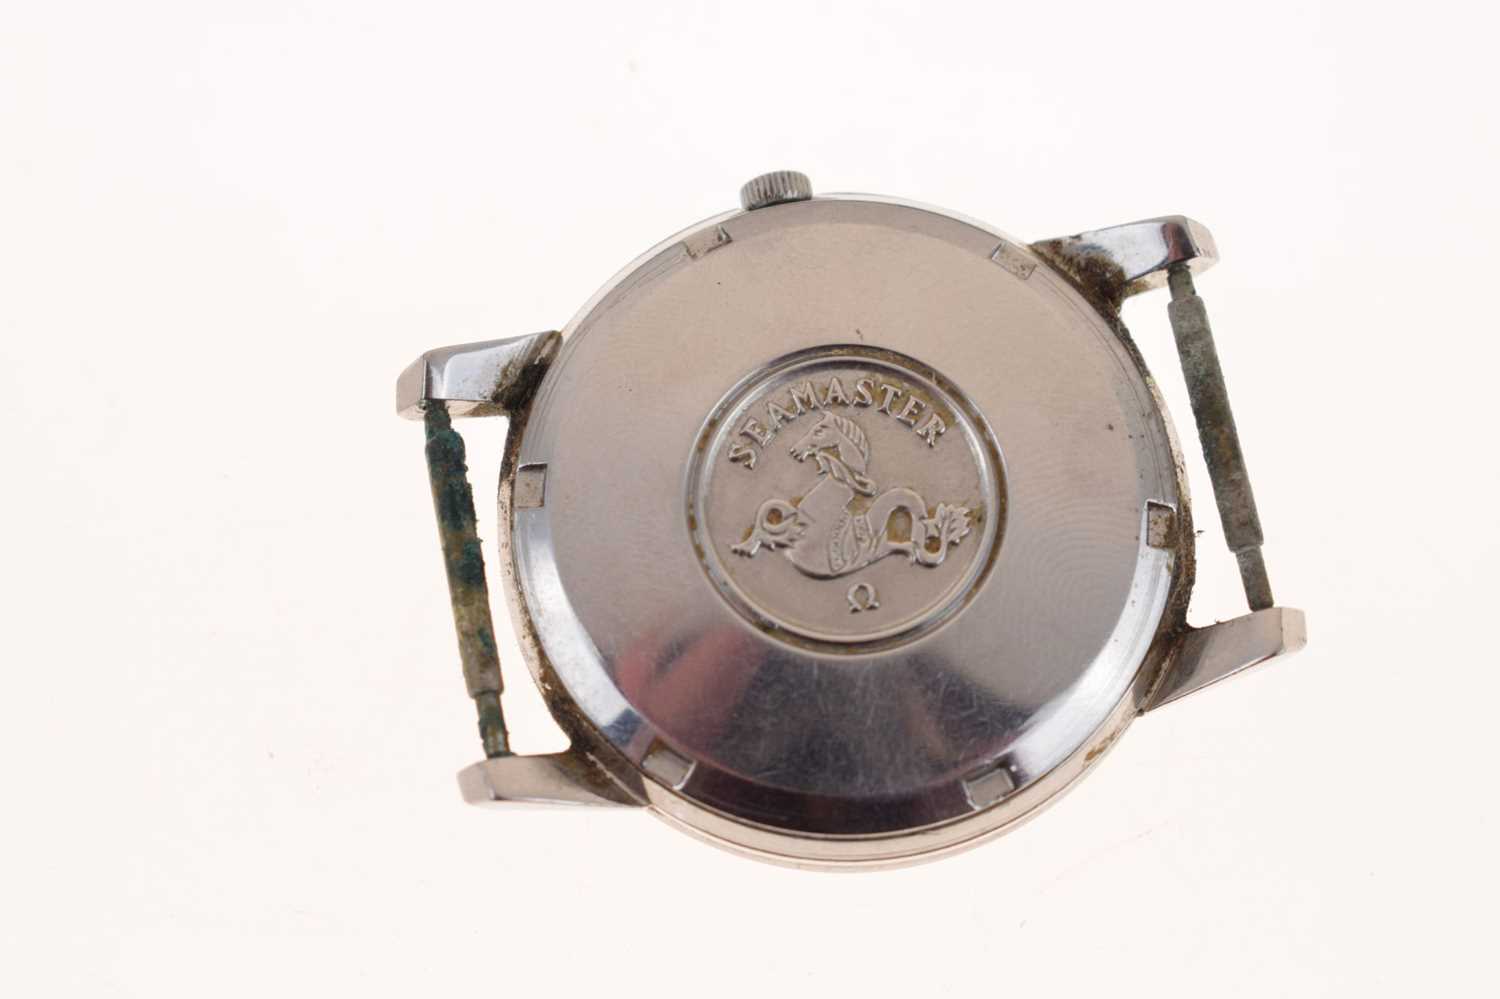 Omega - Gentleman's 1970s Seamaster Automatic watch head - Image 8 of 9